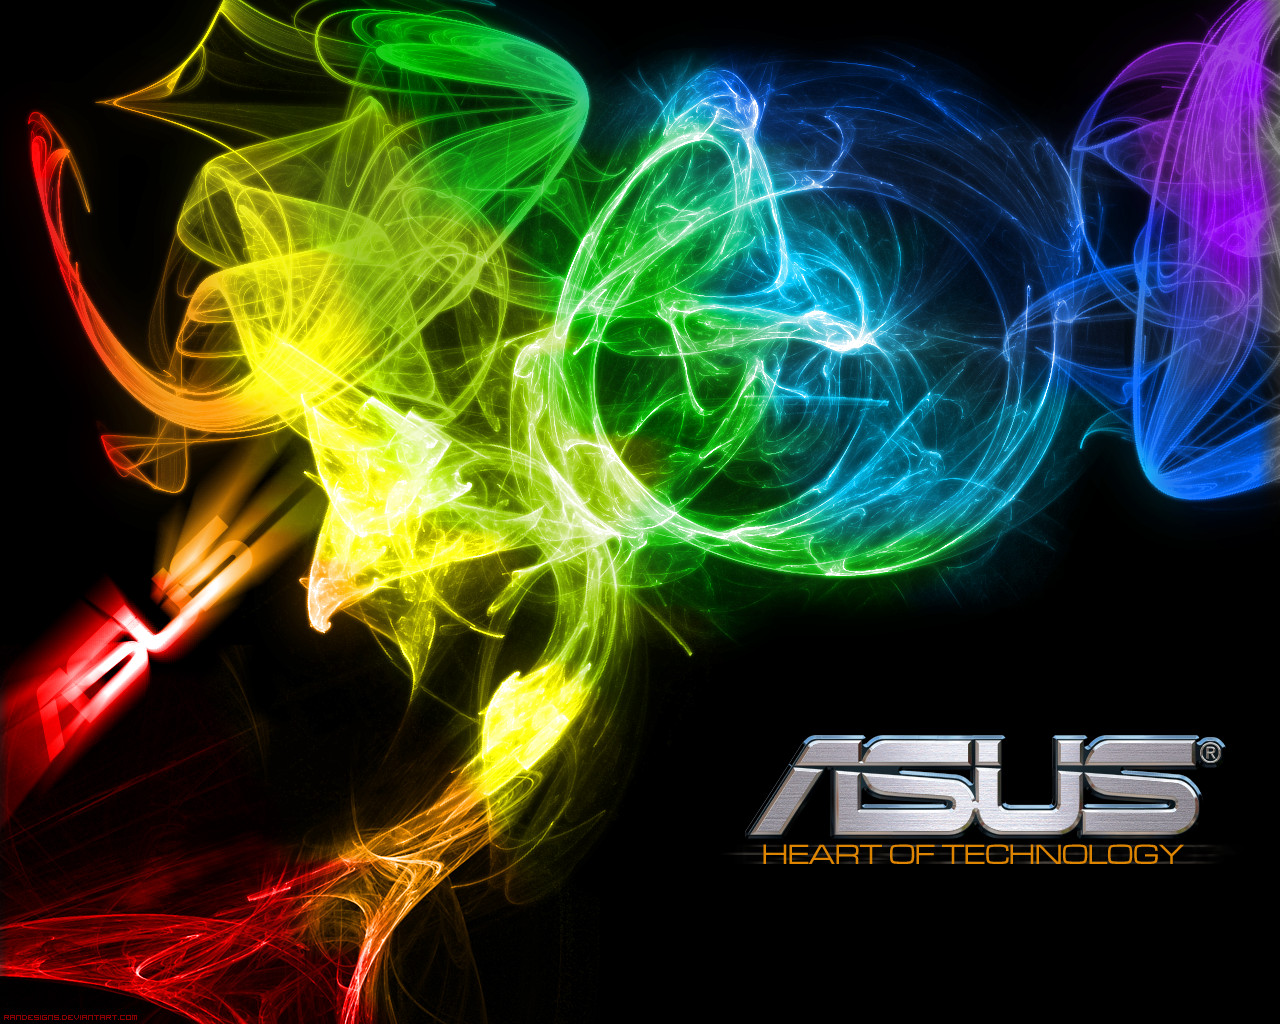 asus wallpaper 1280x1024 5 4 back to wallpaper back home 1280x1024